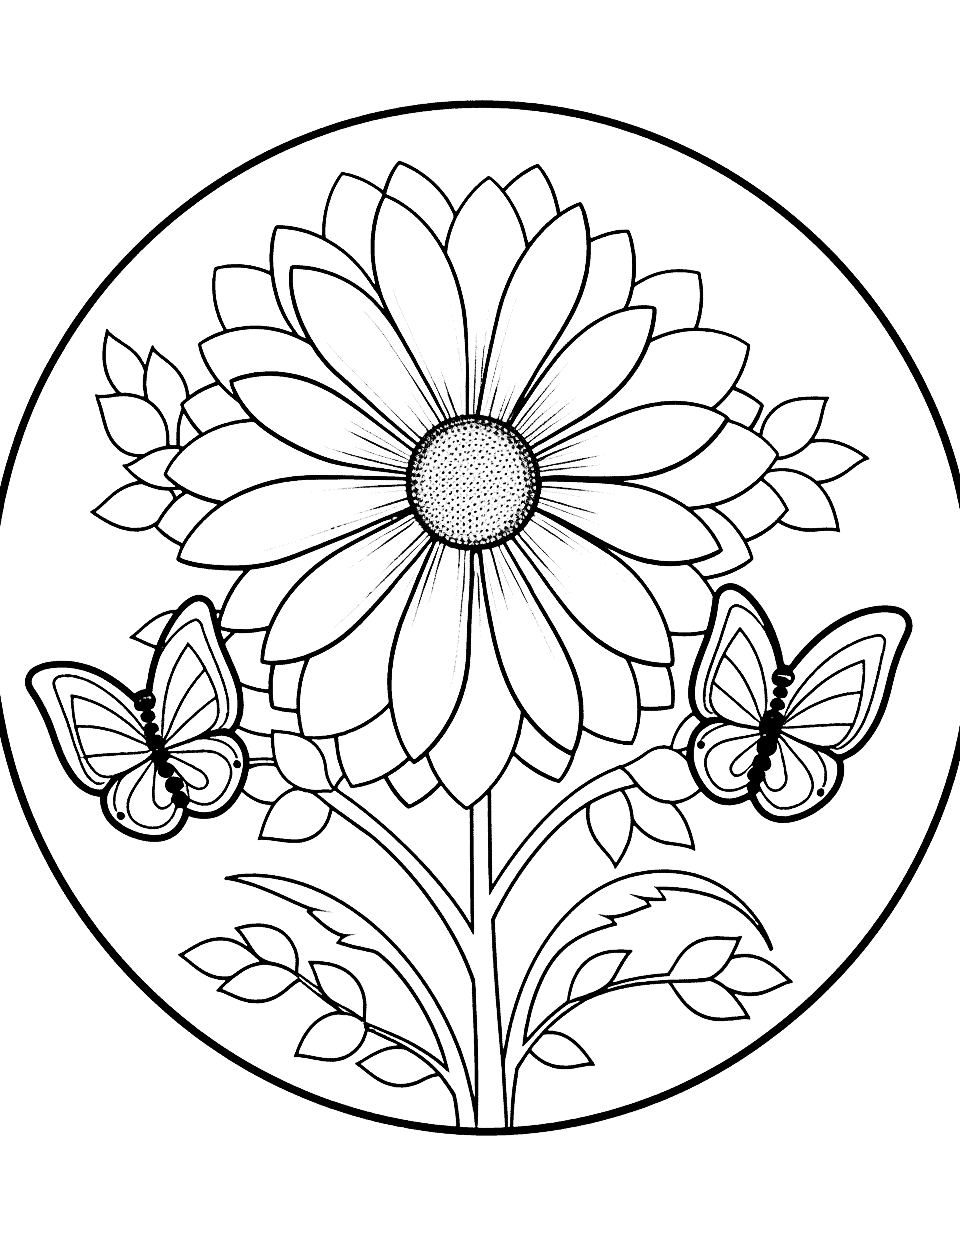 Sunflower and Butterfly Mandala Flower Coloring Page - A complex mandala featuring sunflowers and butterflies.